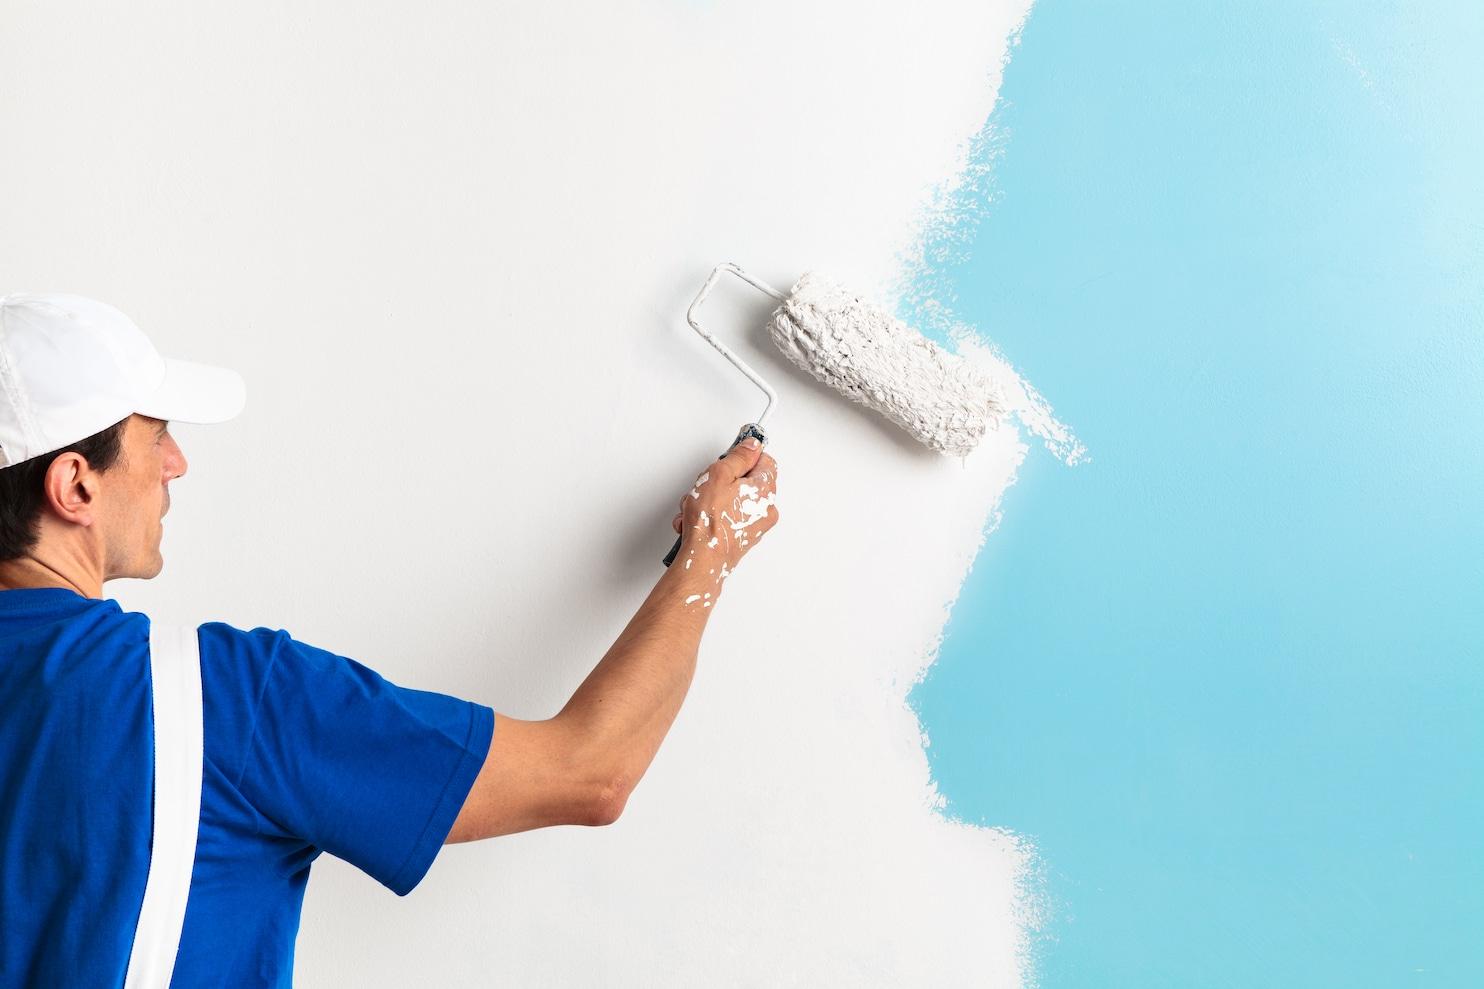 Pro or no? What to consider before hiring out a home painting job. - The Washington Post